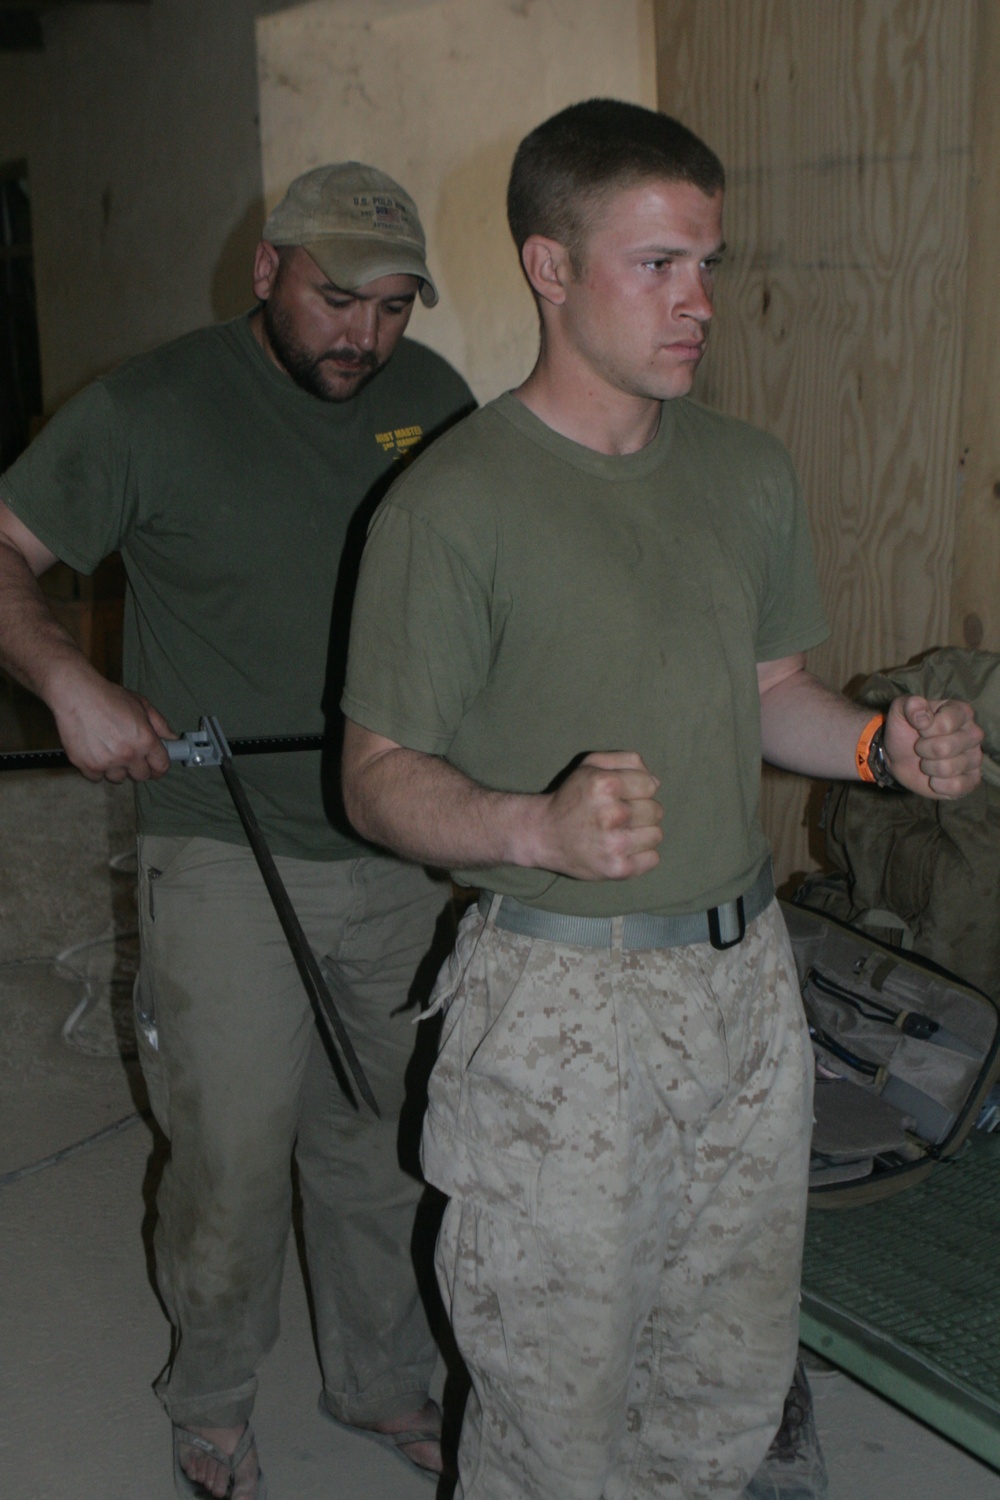 Marine Corps Systems Command studies effects of protective equipment on Marines in Afghanistan